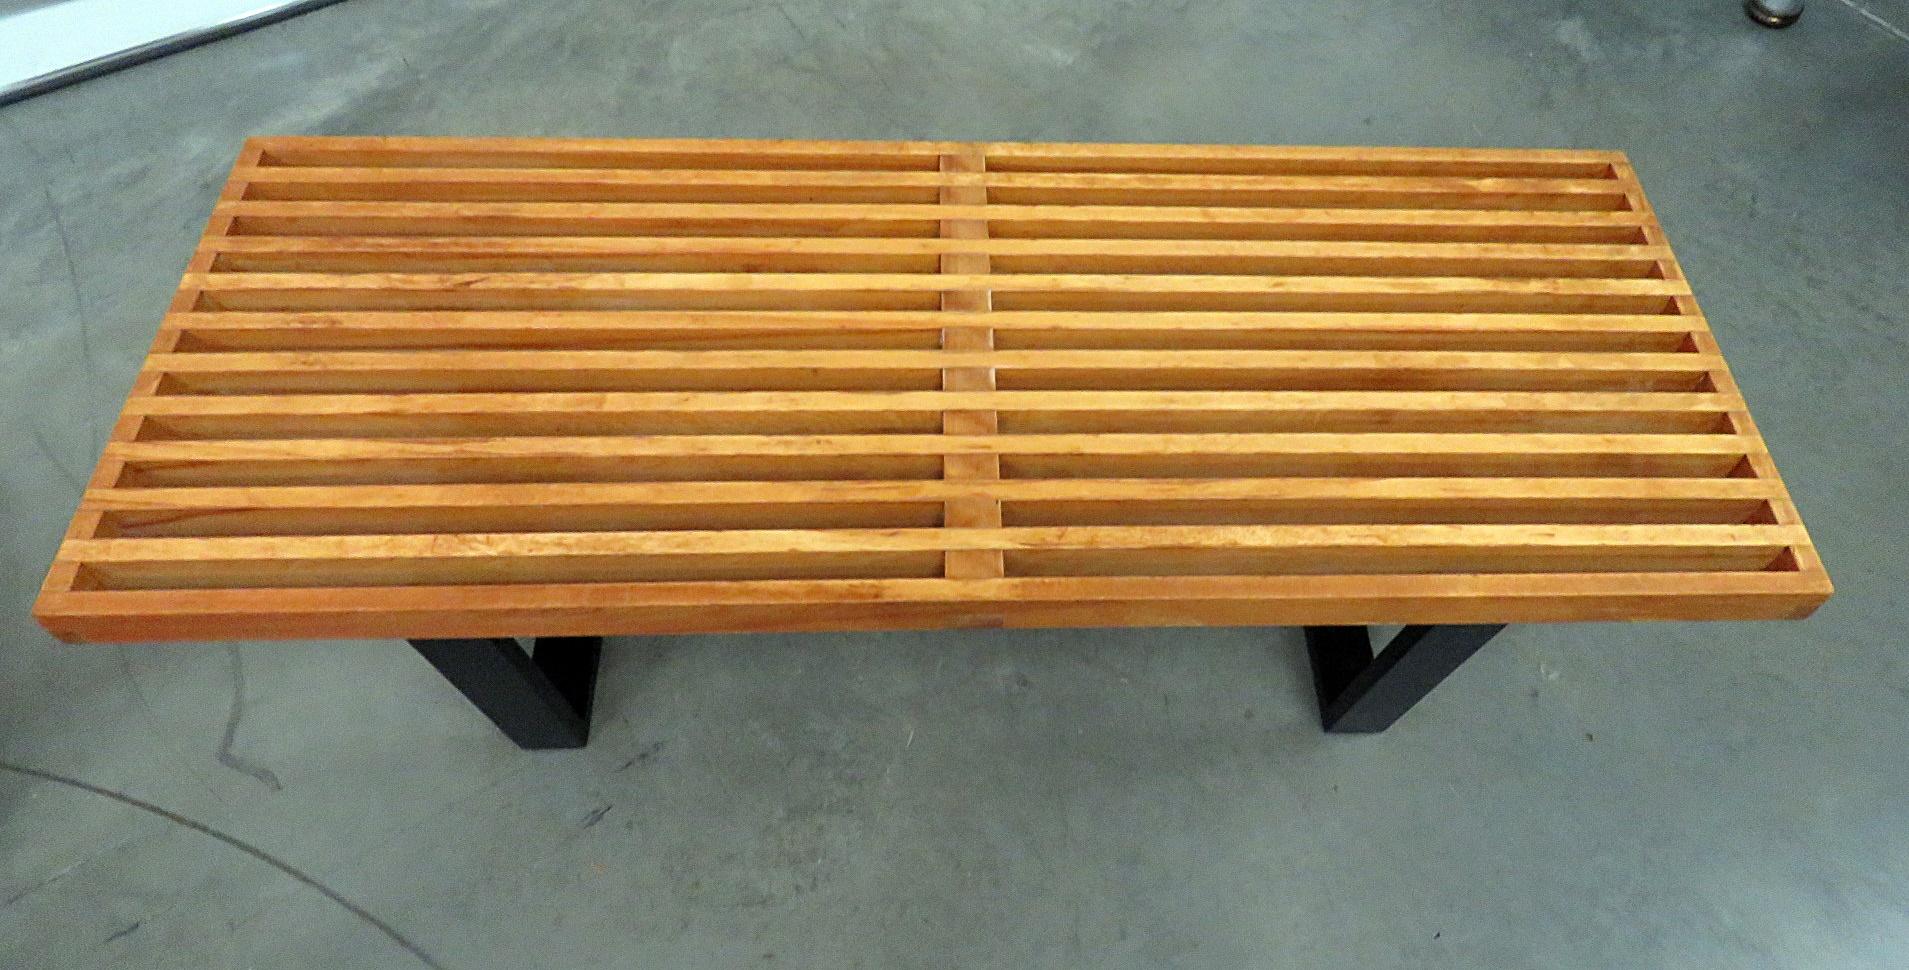 Wood Pair of Mid-Century Modern Benches Attributed to Herman Miller